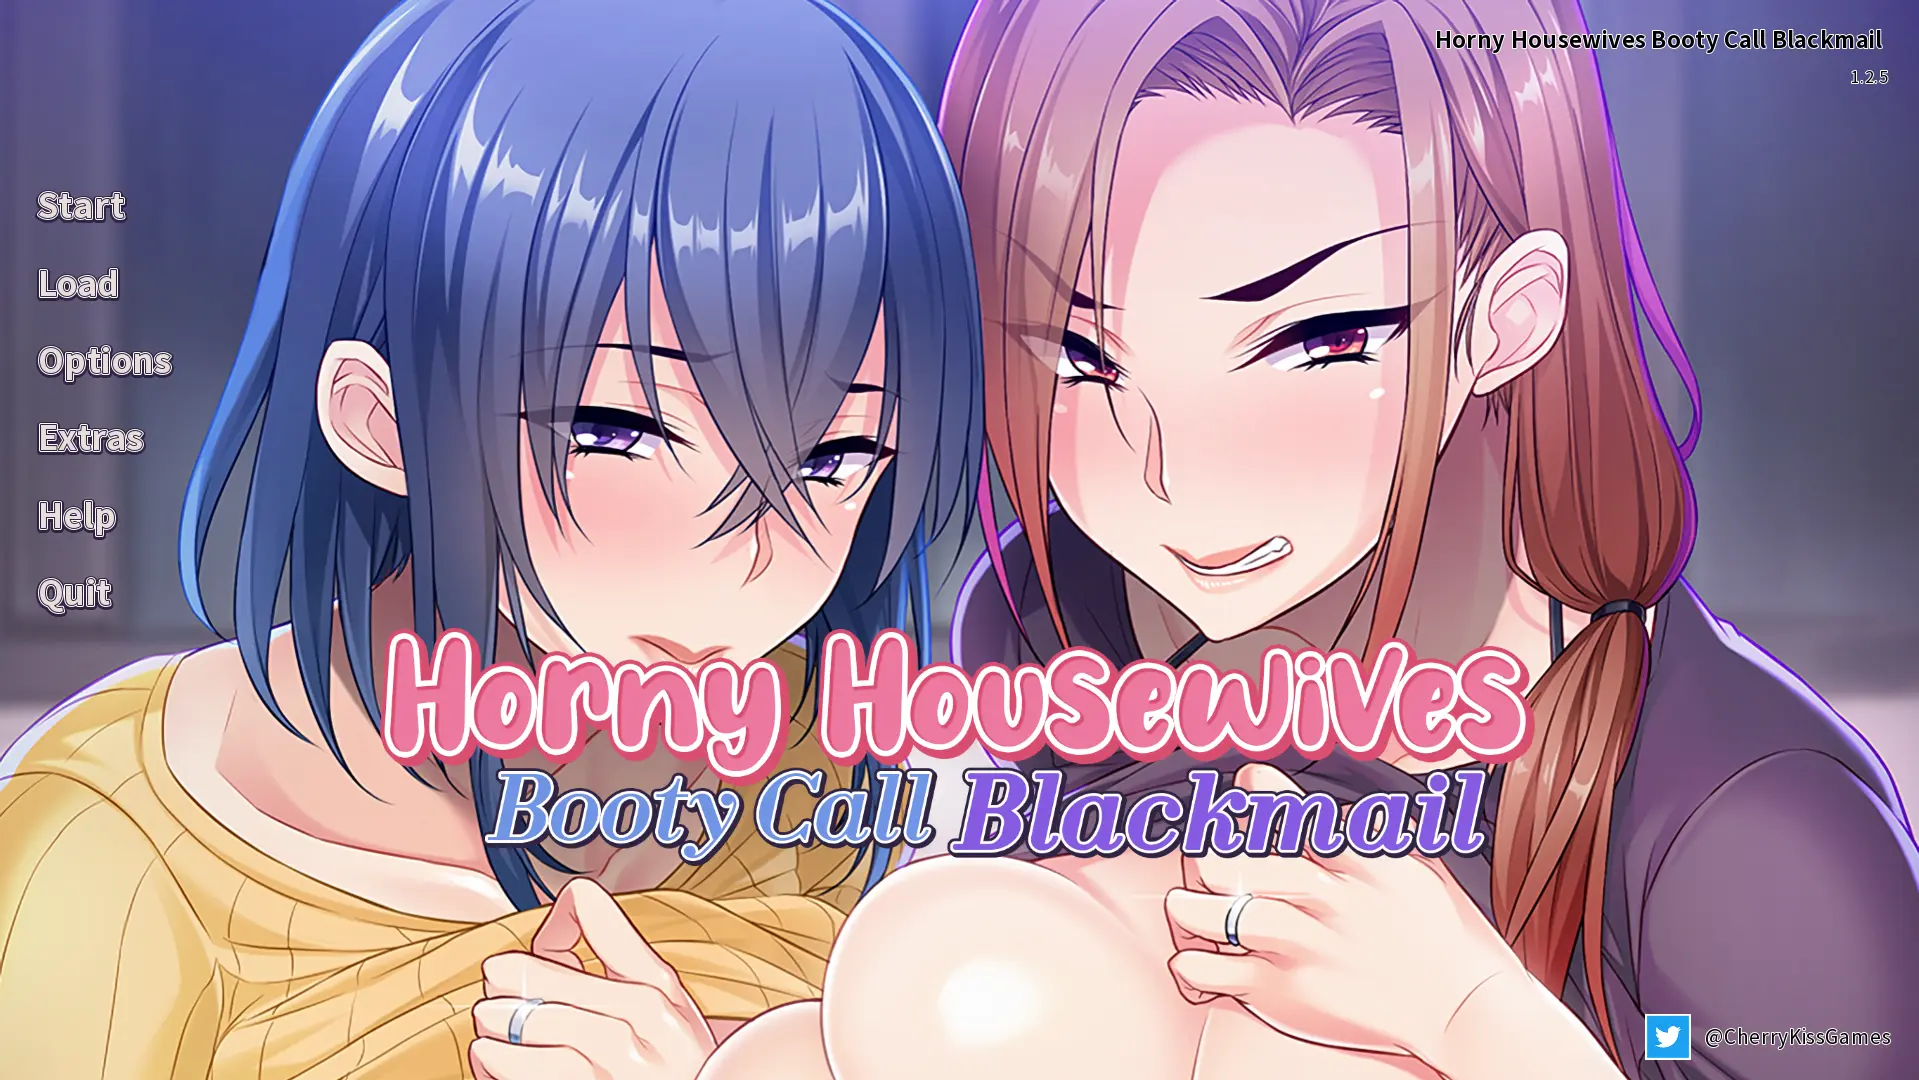 Horny Housewives Booty Call Blackmail main image